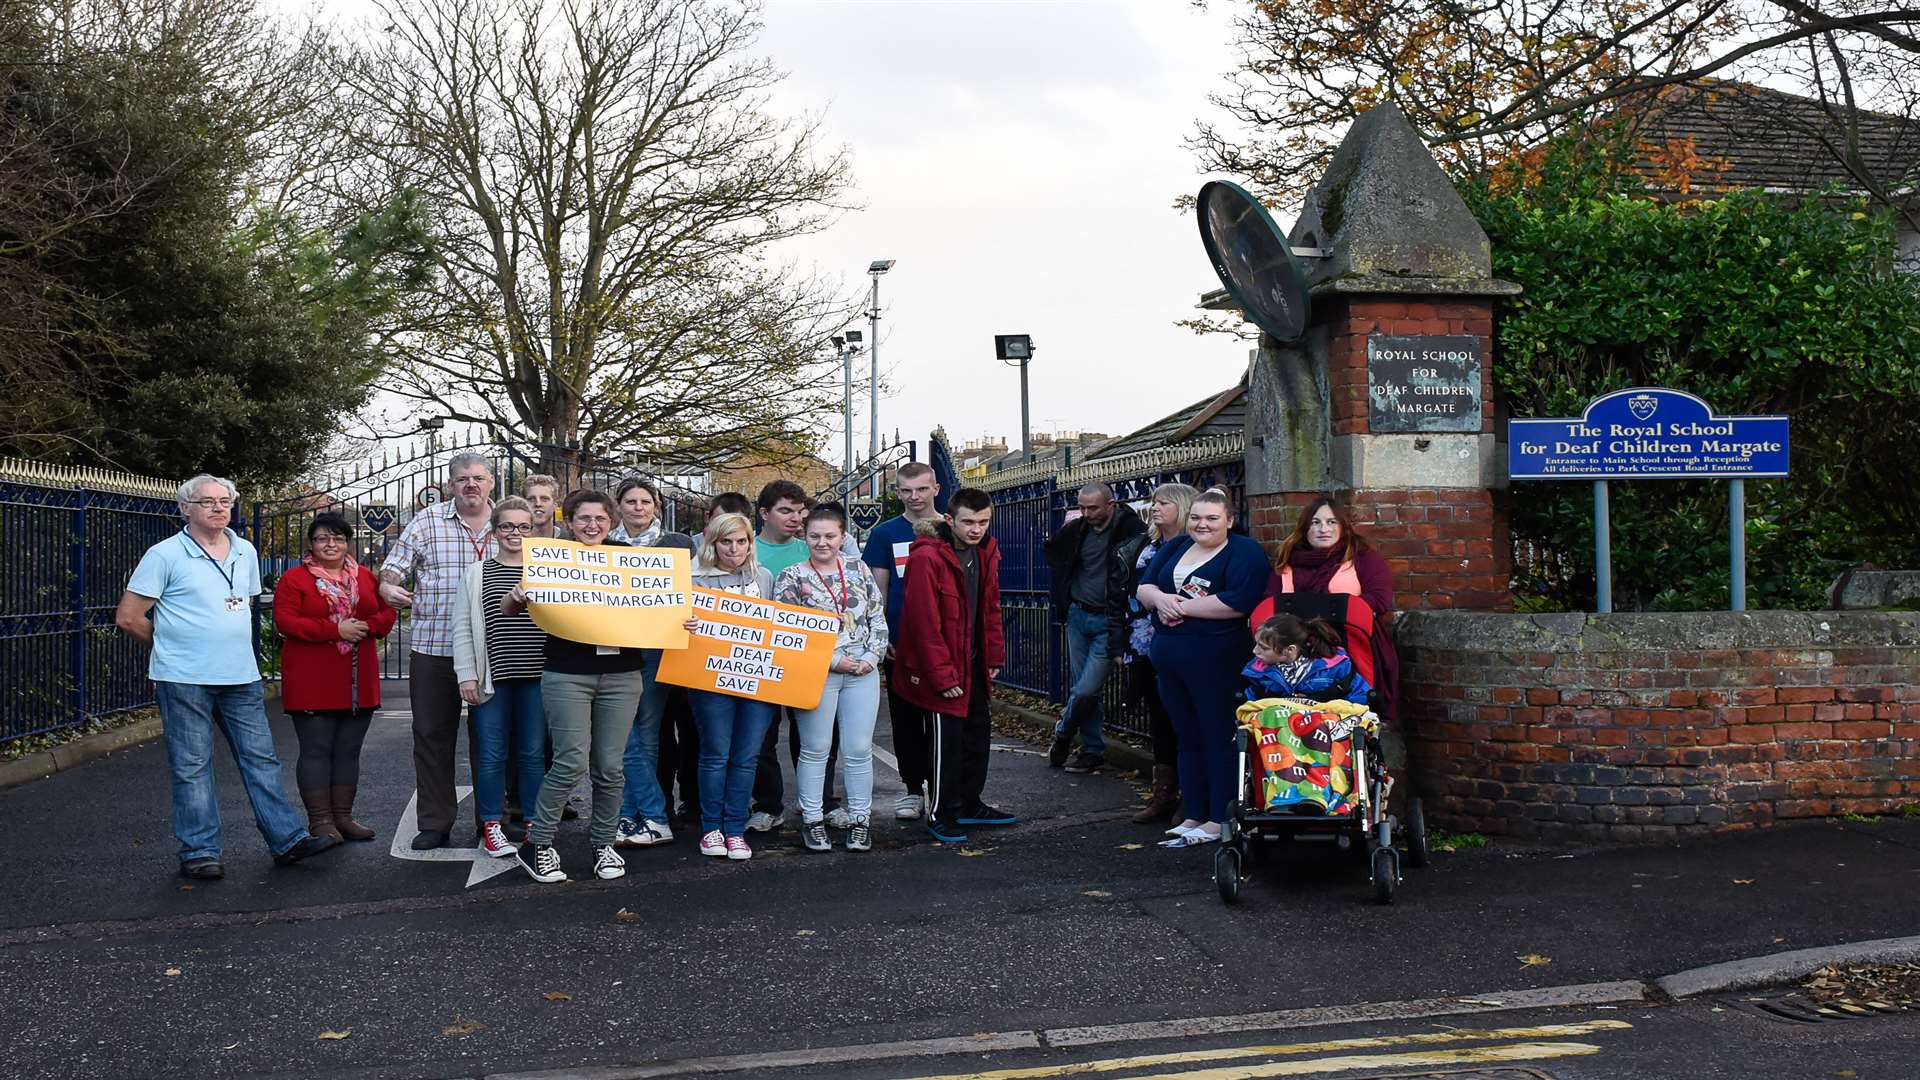 Almost 20 people attended the protest outside of the Royal School for Deaf Children to show how much the school meant to them